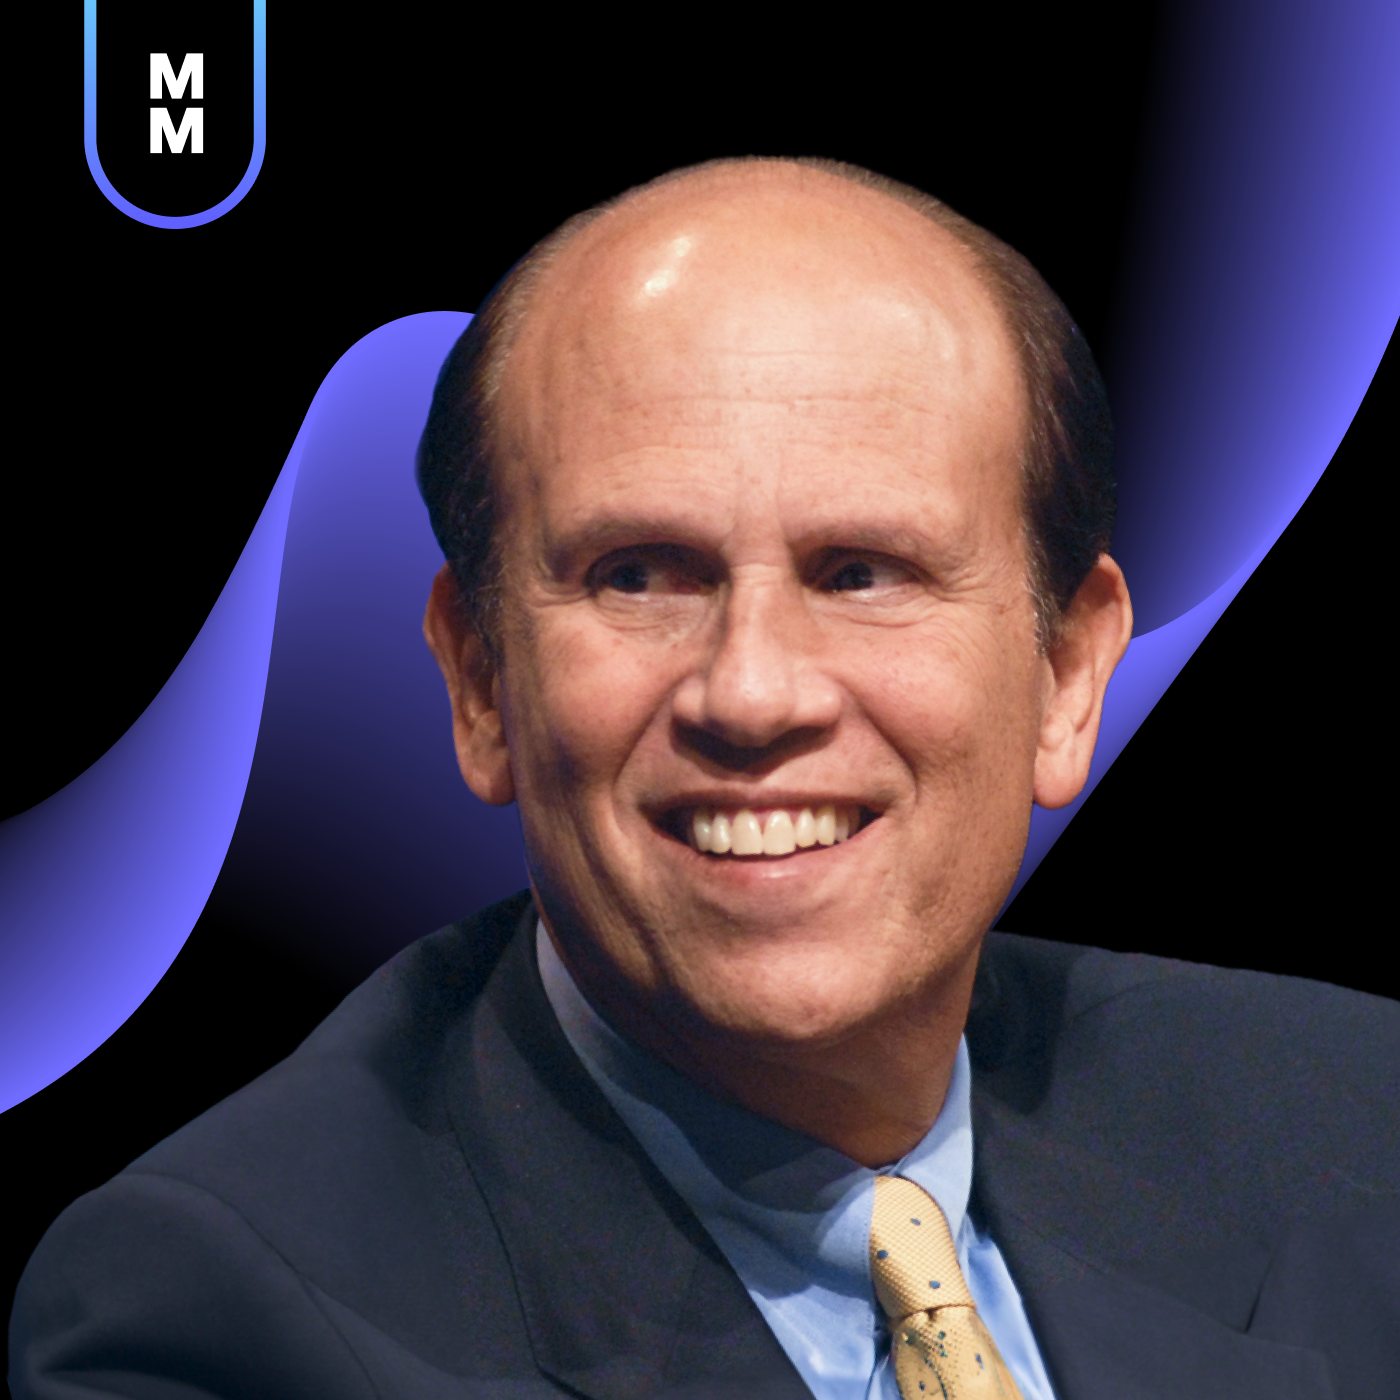 Ep 97 | Expanding Access to the American Dream | A Conversation with Michael Milken